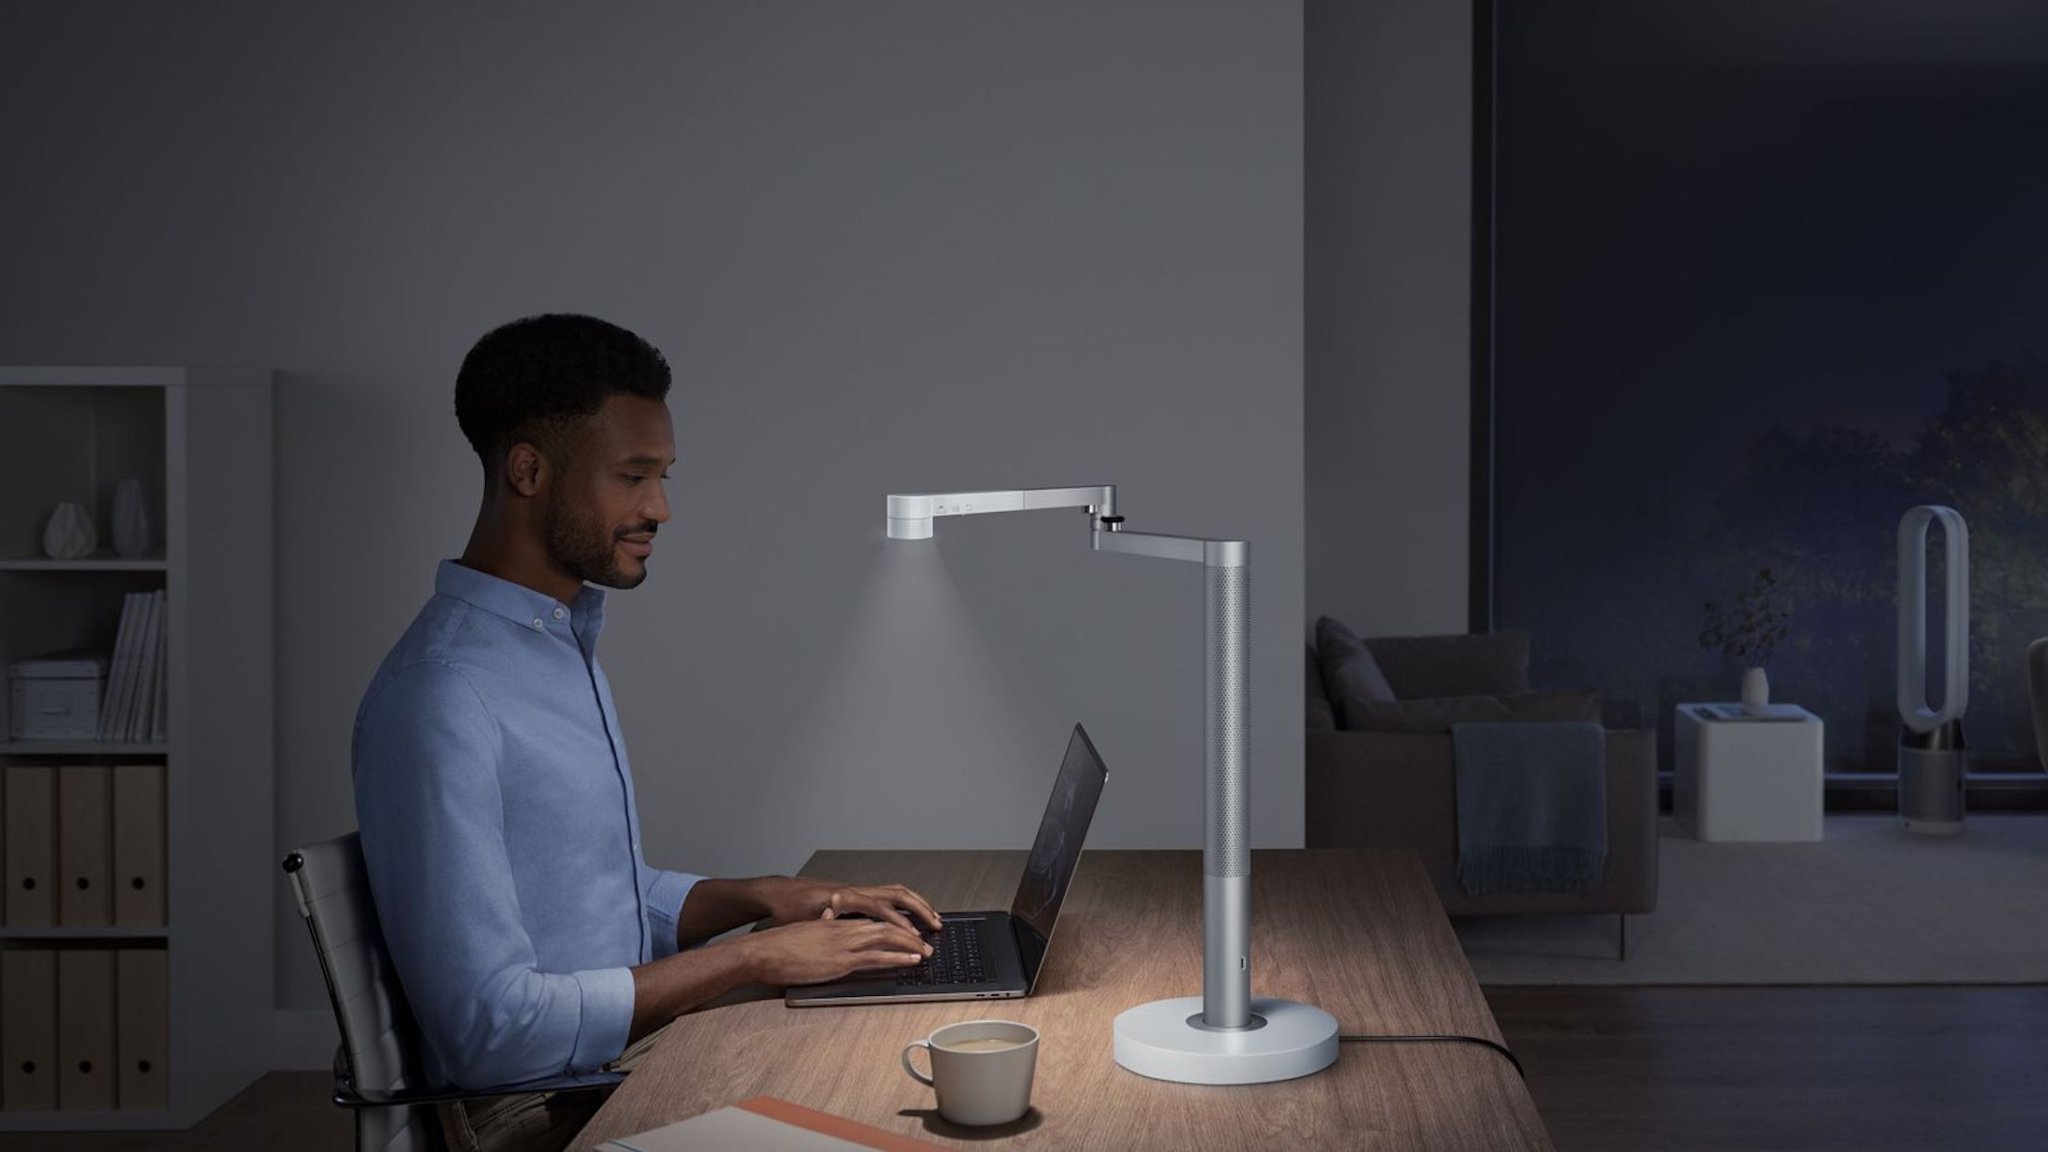 Dyson Lightcycle Morph Adaptable Intelligent Lighting responds to surroundings and time of day